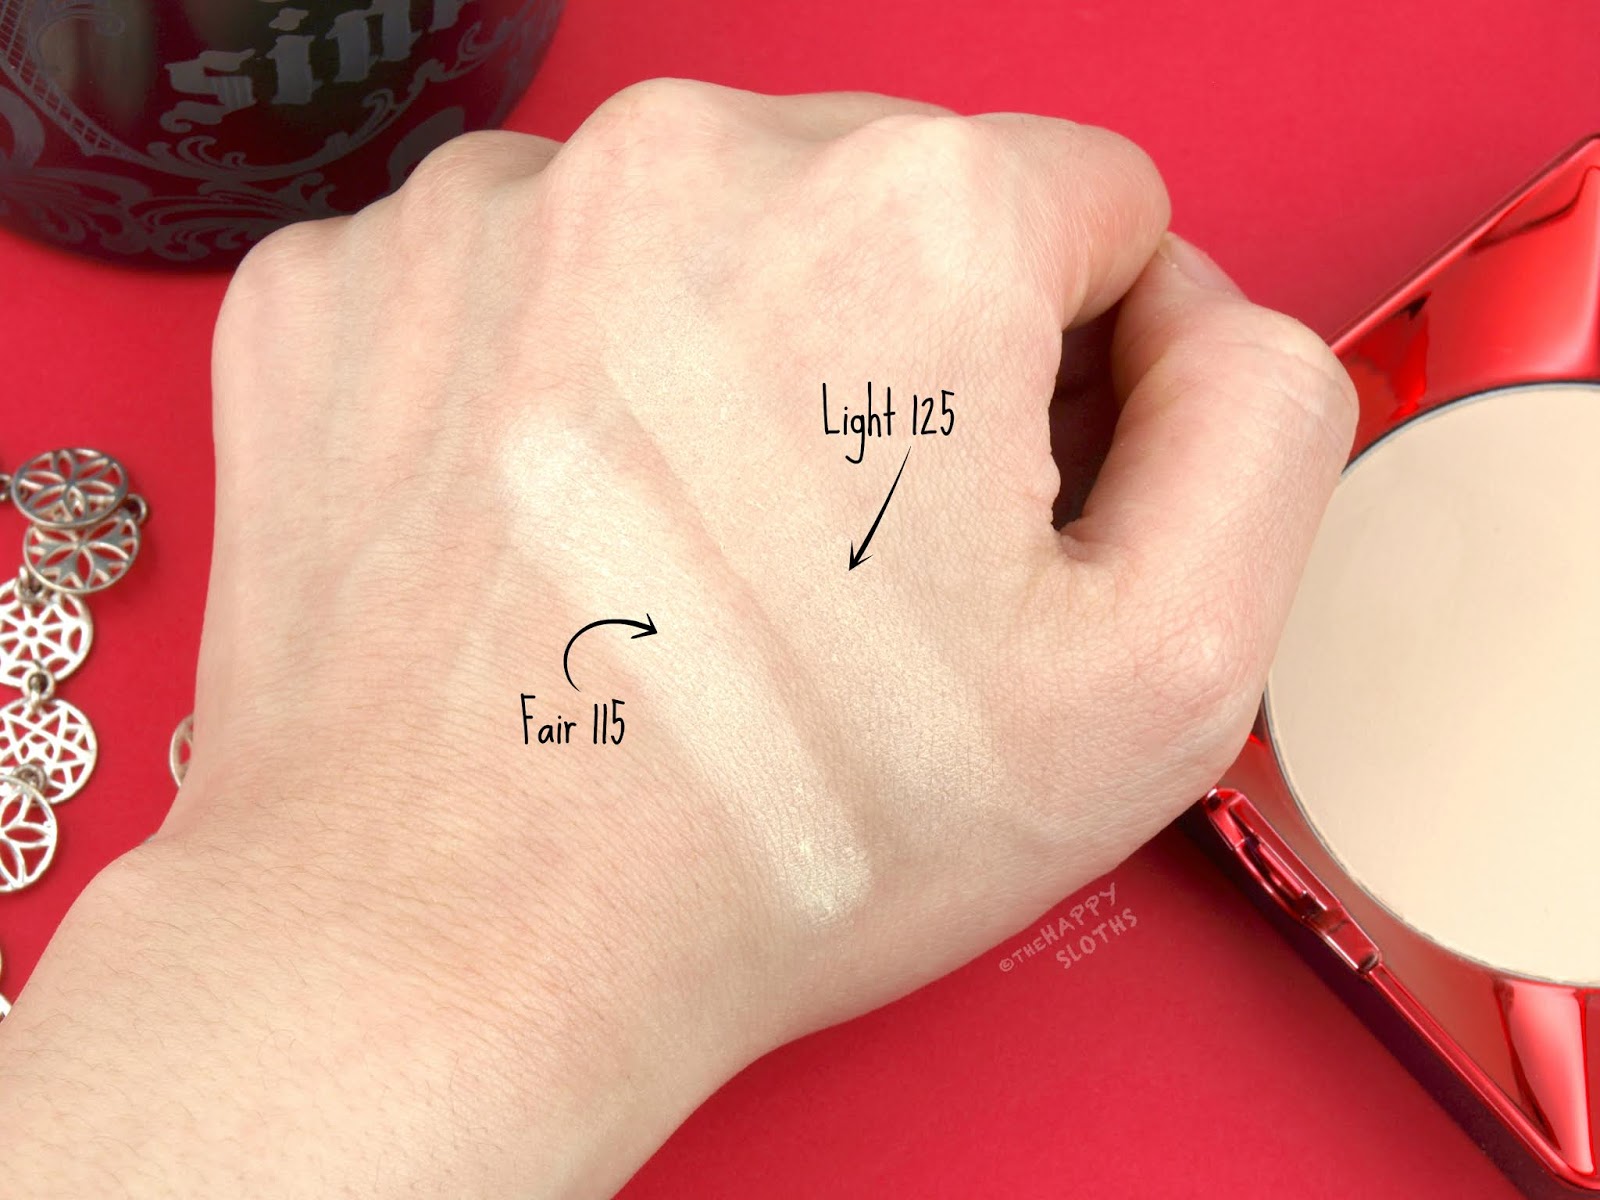 Kat Von D | Lock-It Powder Foundation in "Fair 115" & "Light 125": Review and Swatches